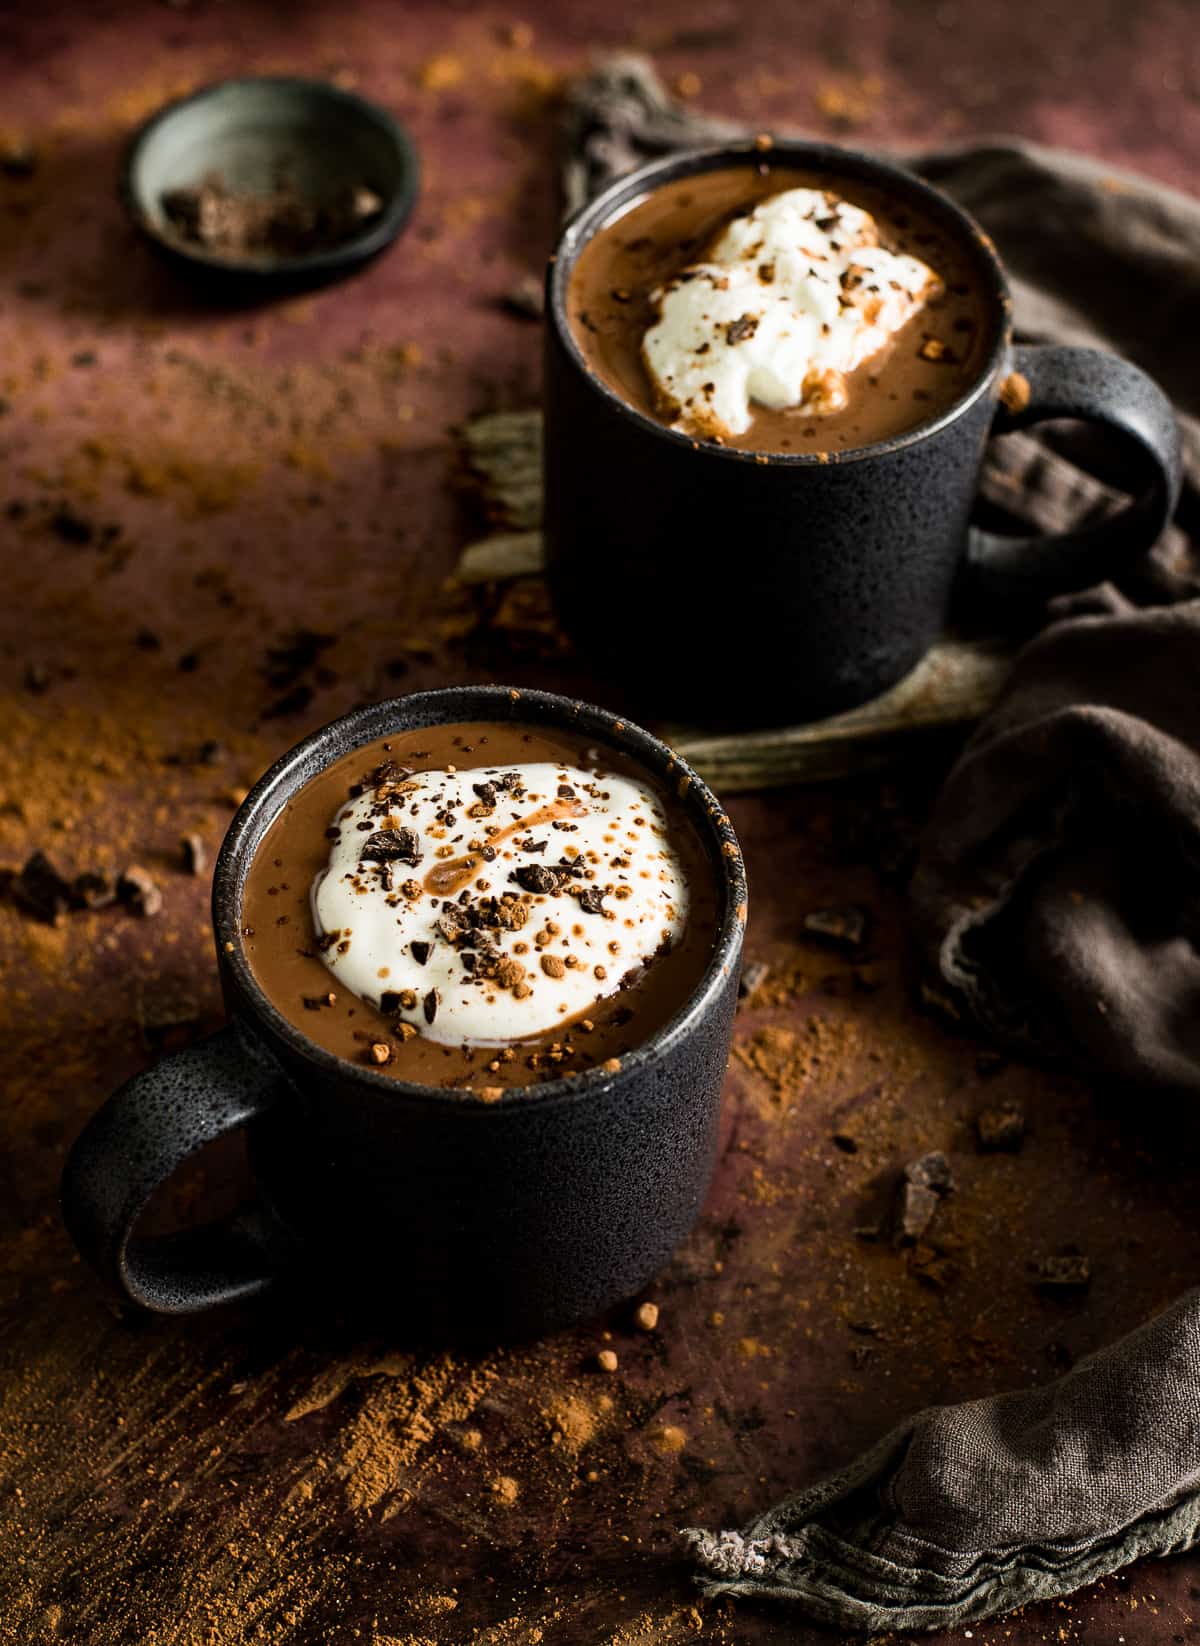 Two cups of vegan hot chocolate with whipped cream and chocolate shavings.